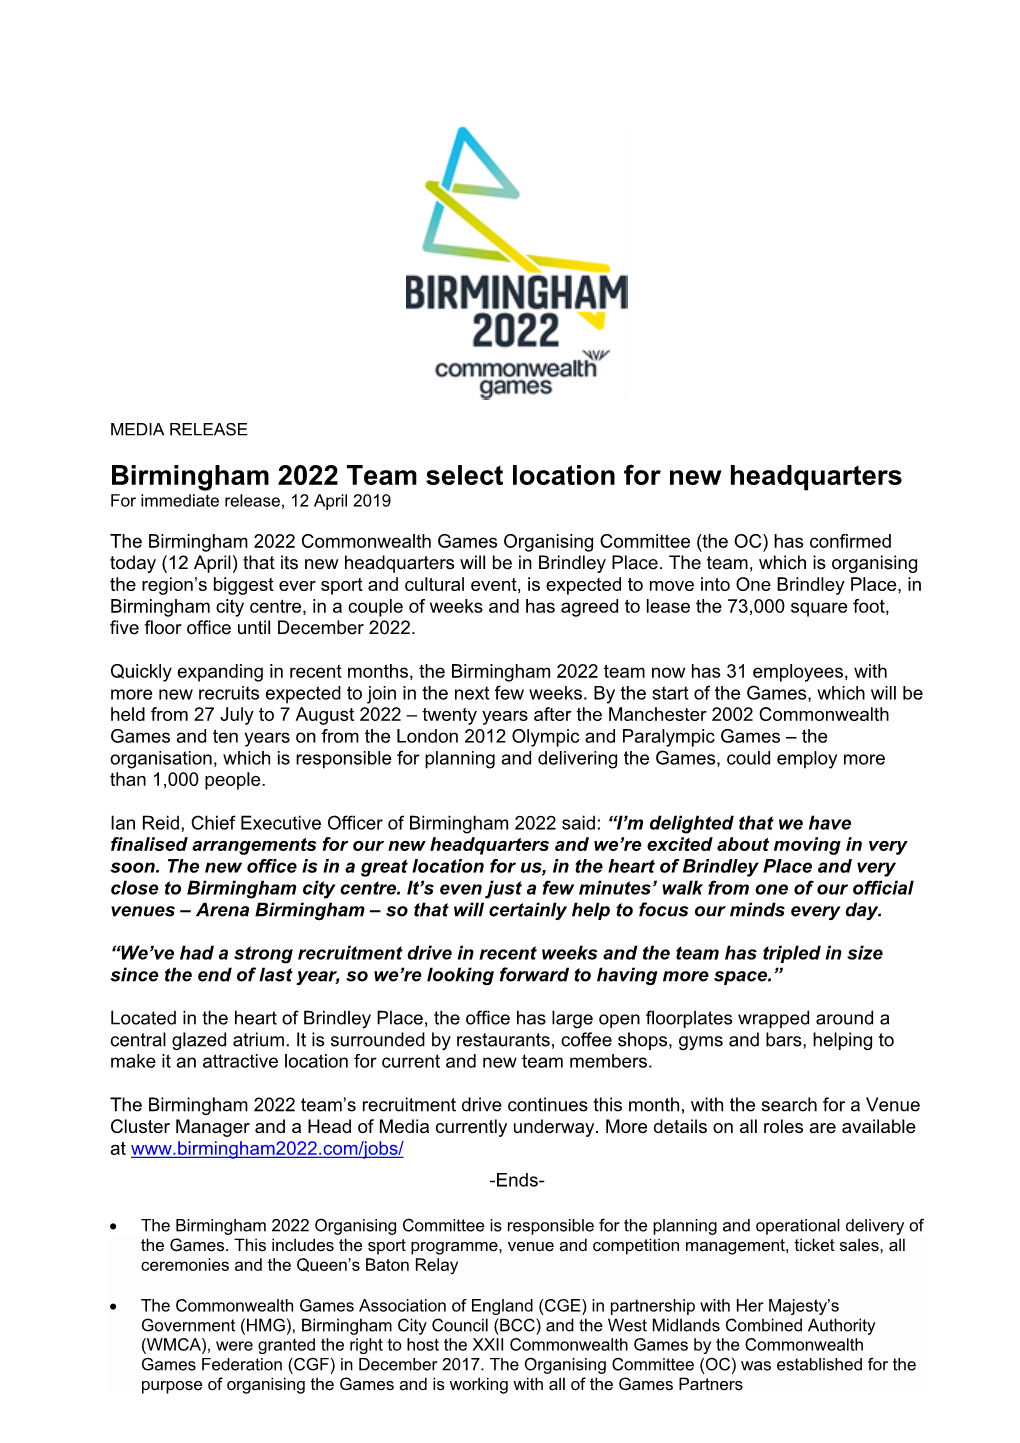 Birmingham 2022 Team Select Location for New Headquarters for Immediate Release, 12 April 2019